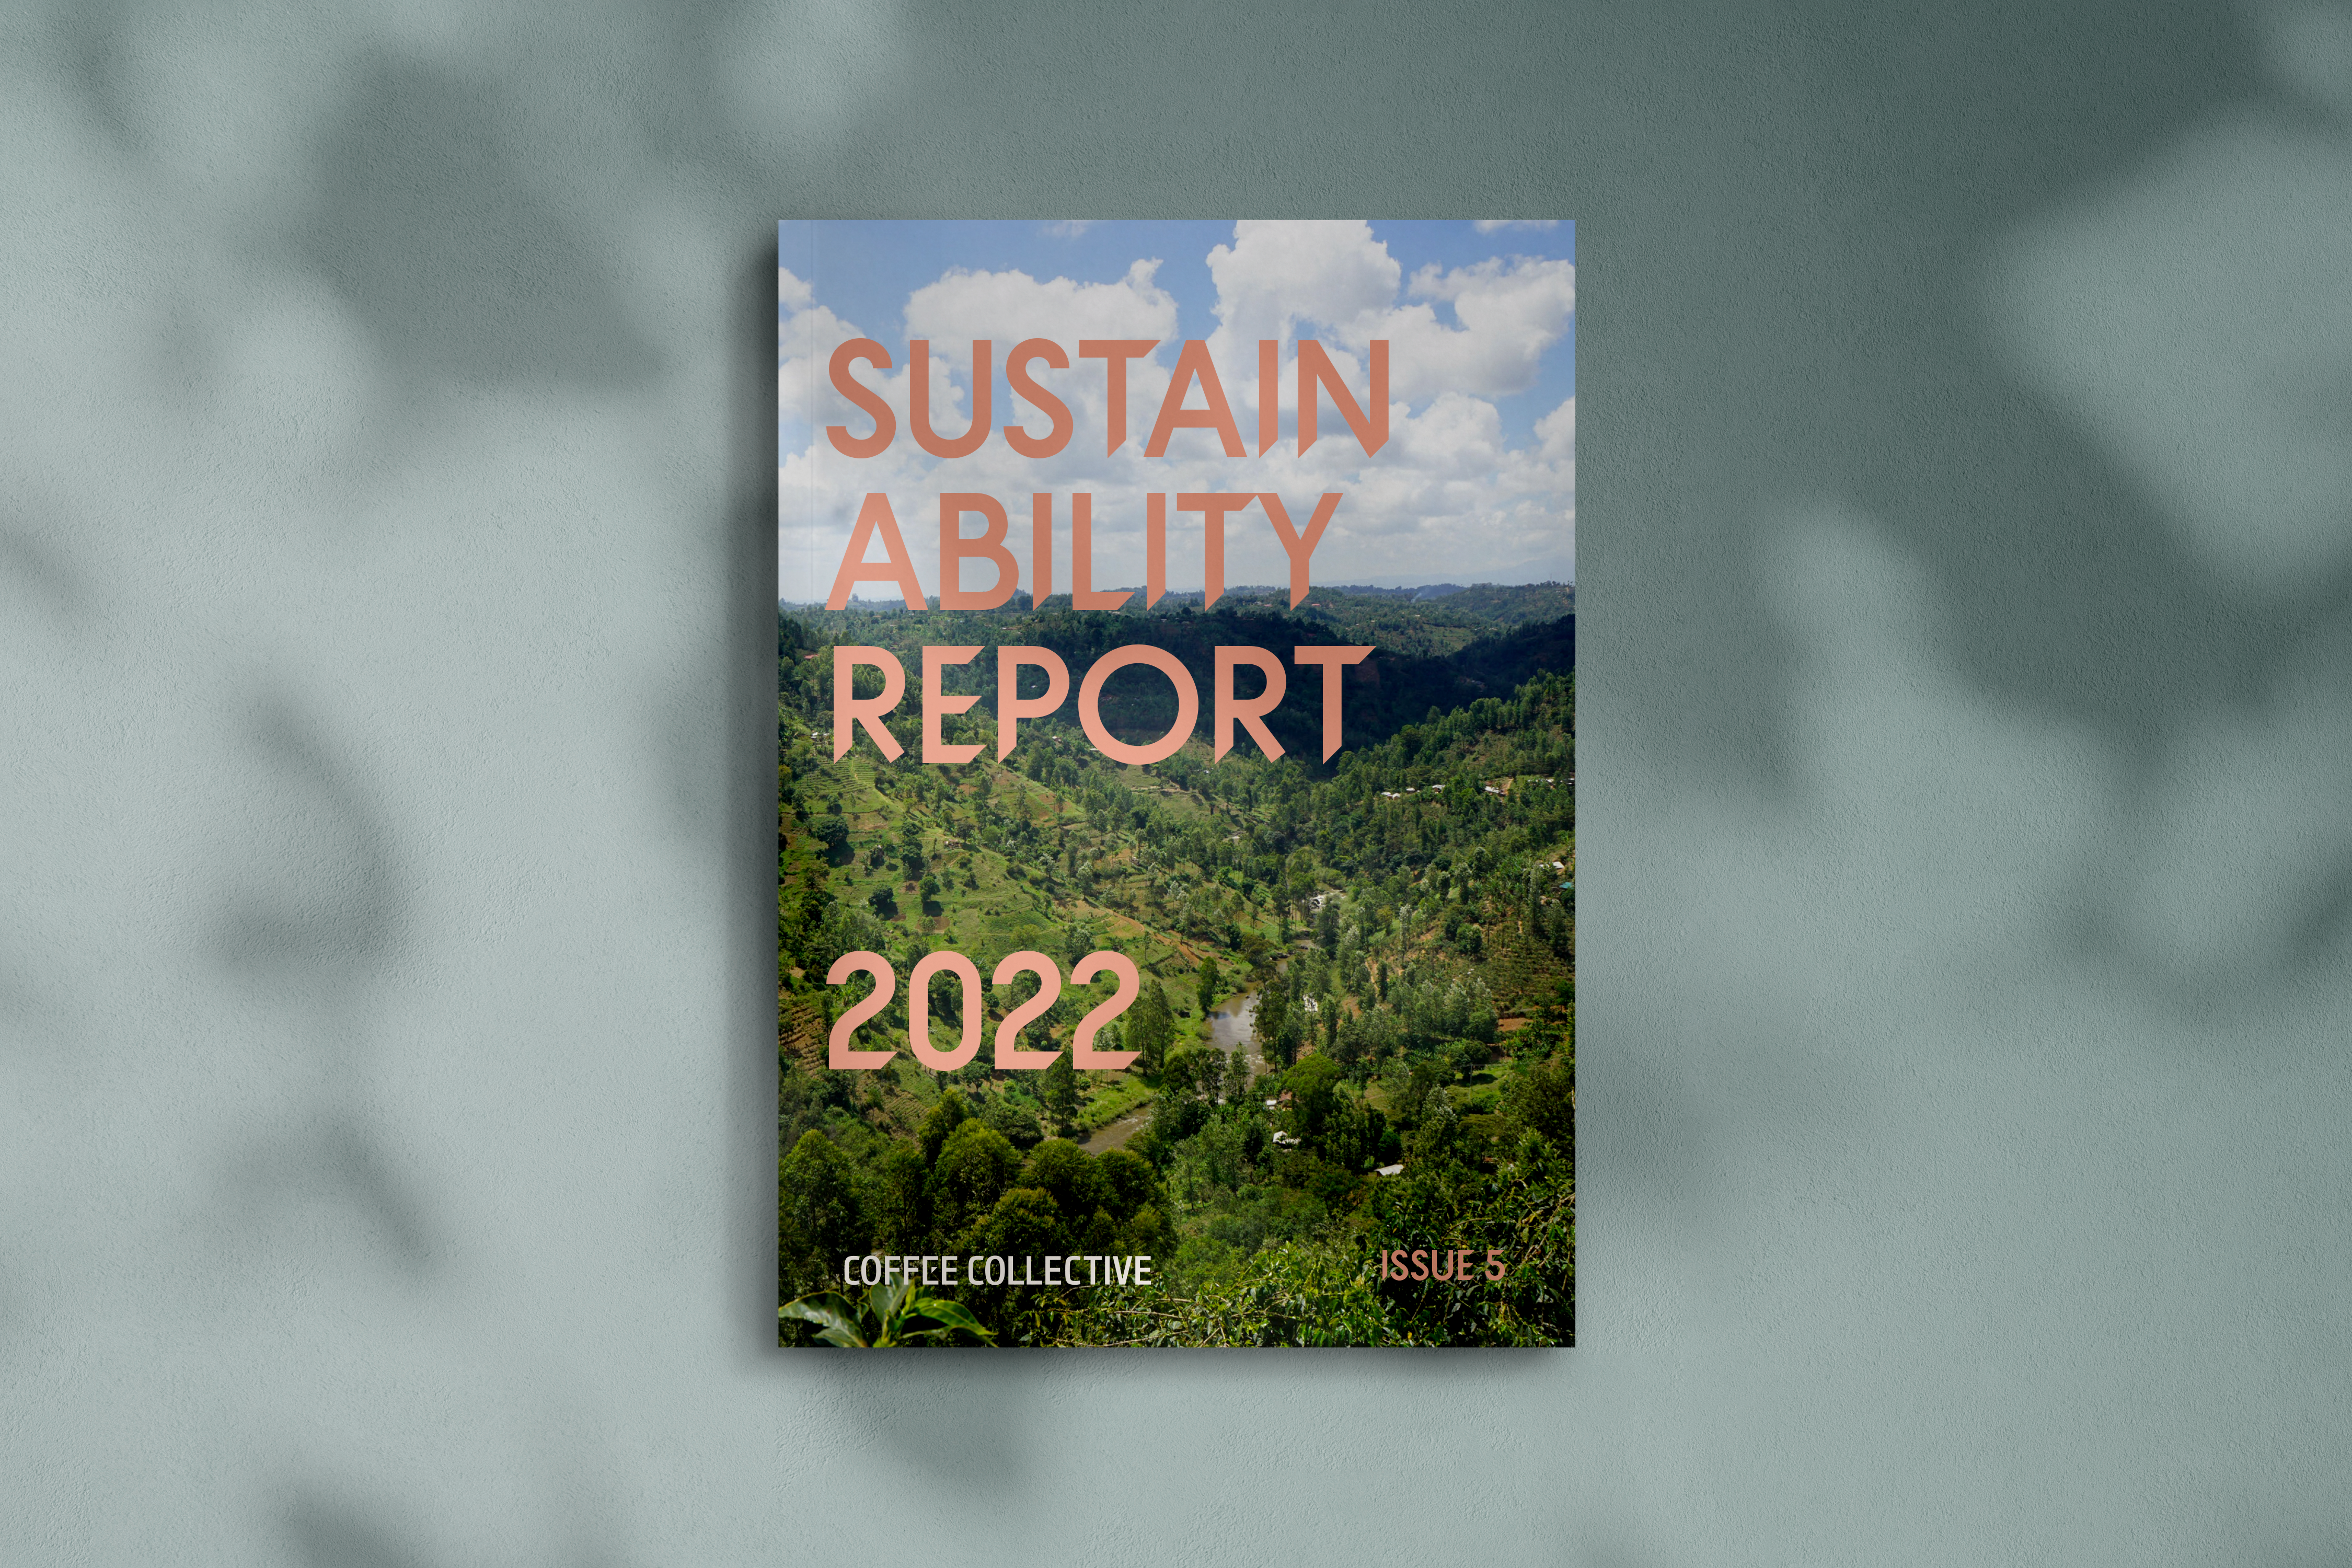 Our Sustainability Report for 2022